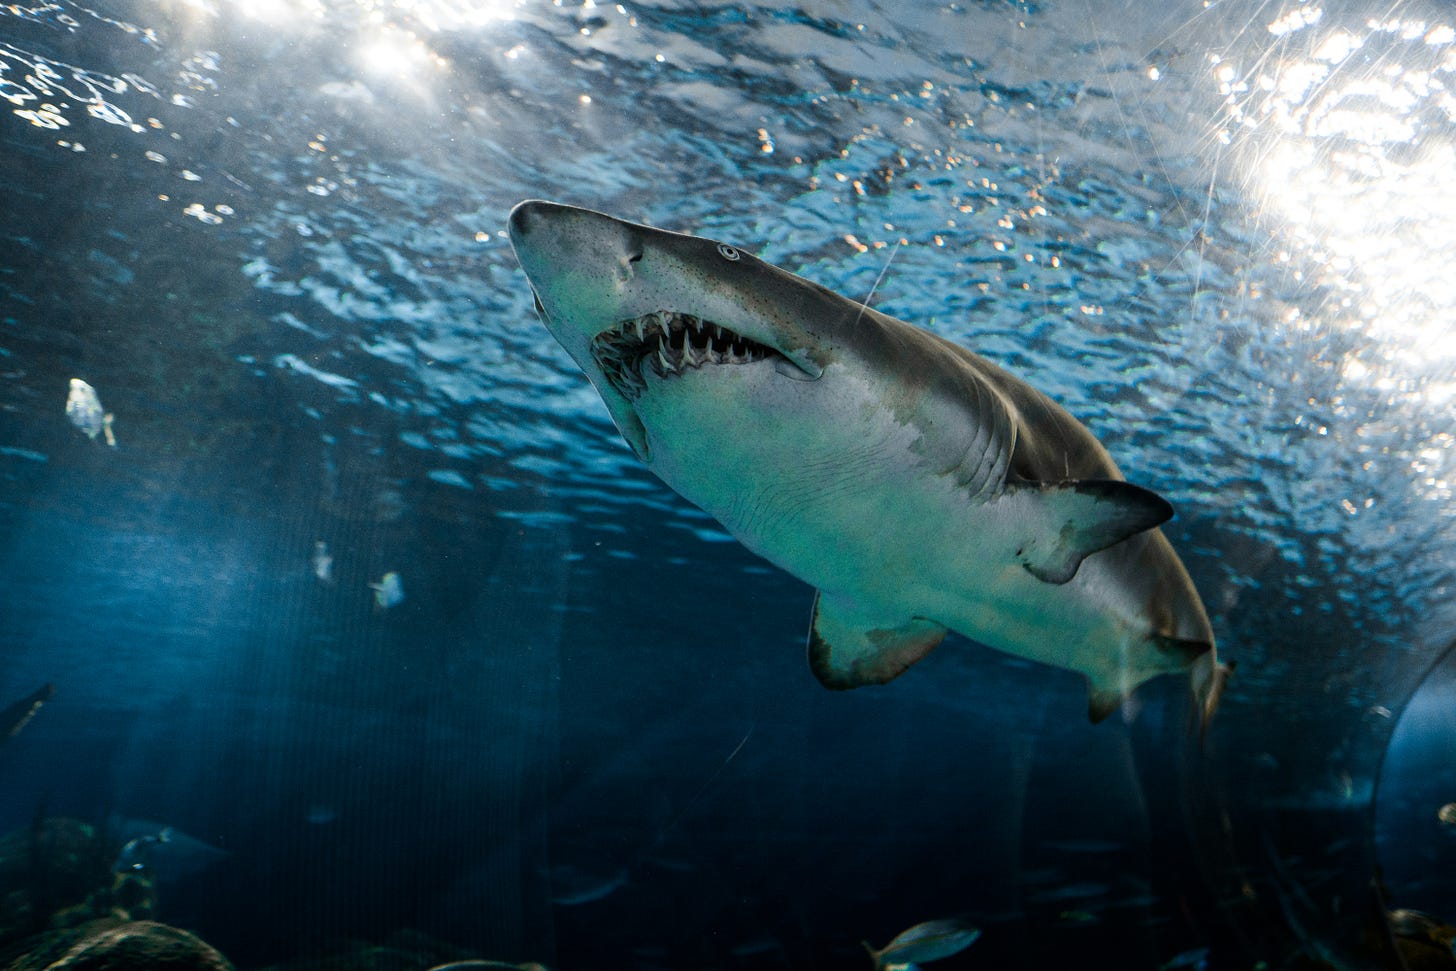 A shark swims with its mouth open, showing its teeth.